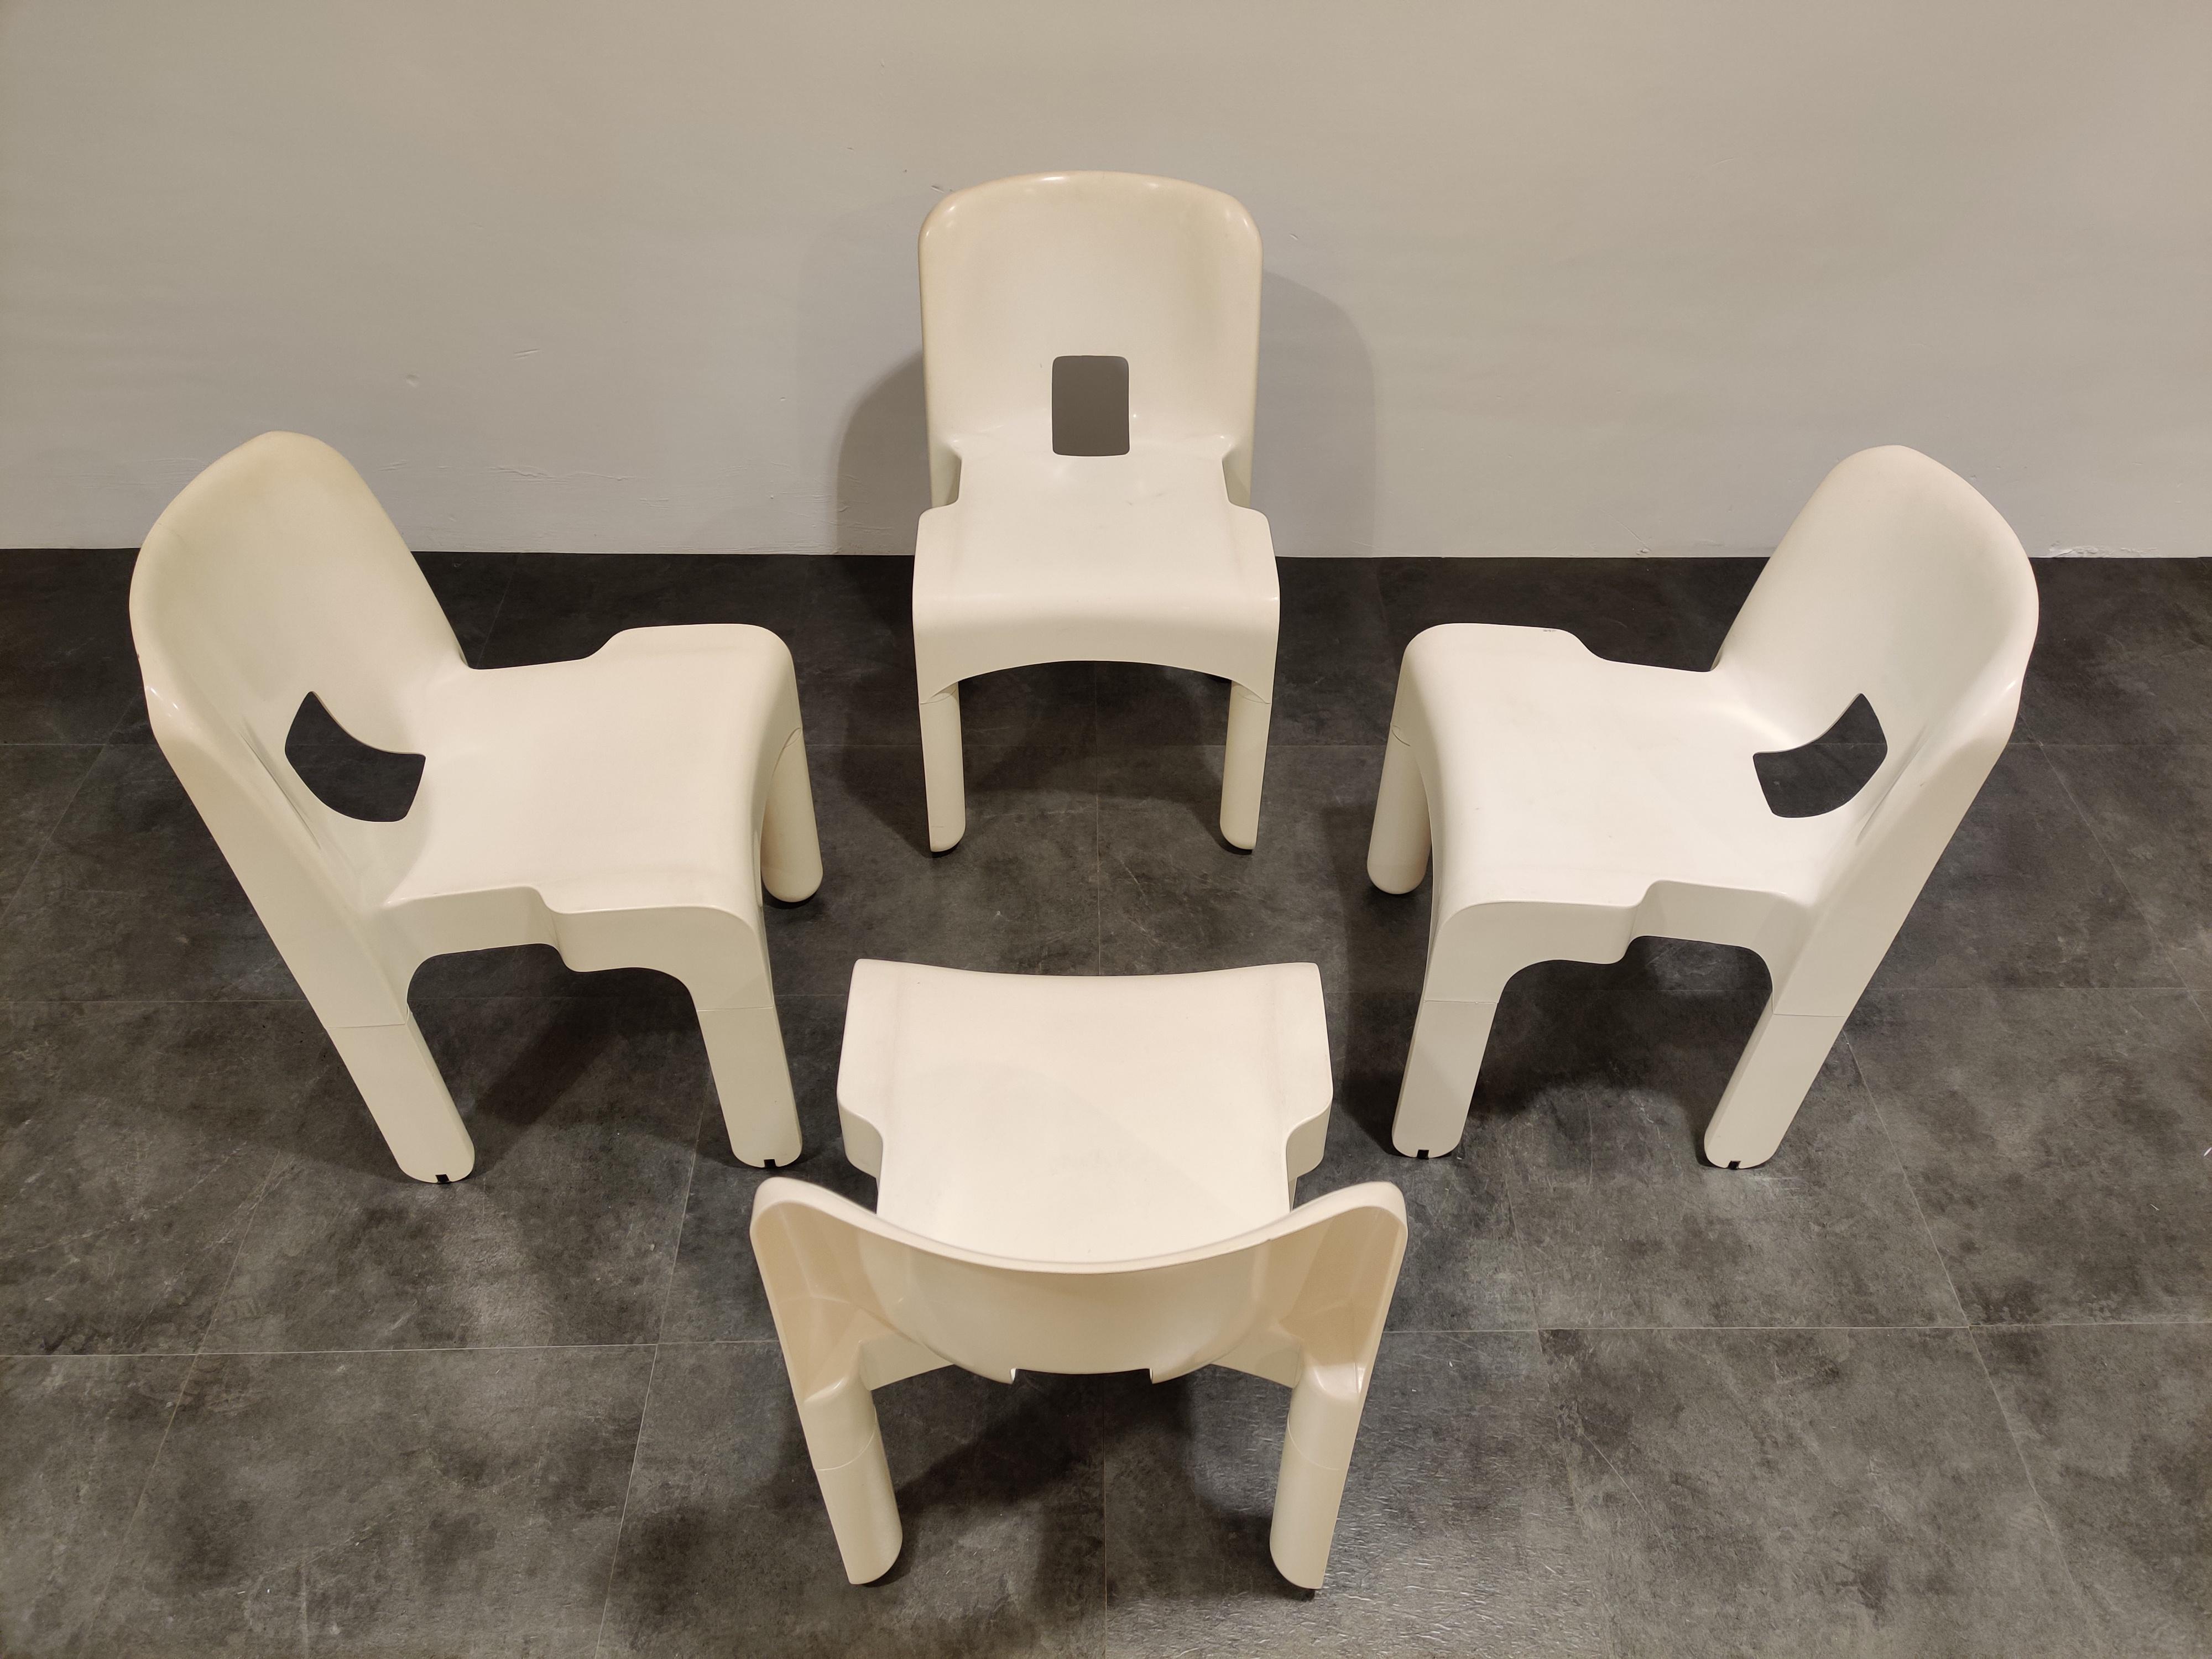 Set of 4 model 4869 chairs designed by Joe Colombo for Kartell.

Original design from 1967

This chair reflects a late-1960s enthusiasm for modern plastic furniture that was particularly strong in Italy

The name 'universale' refers to the